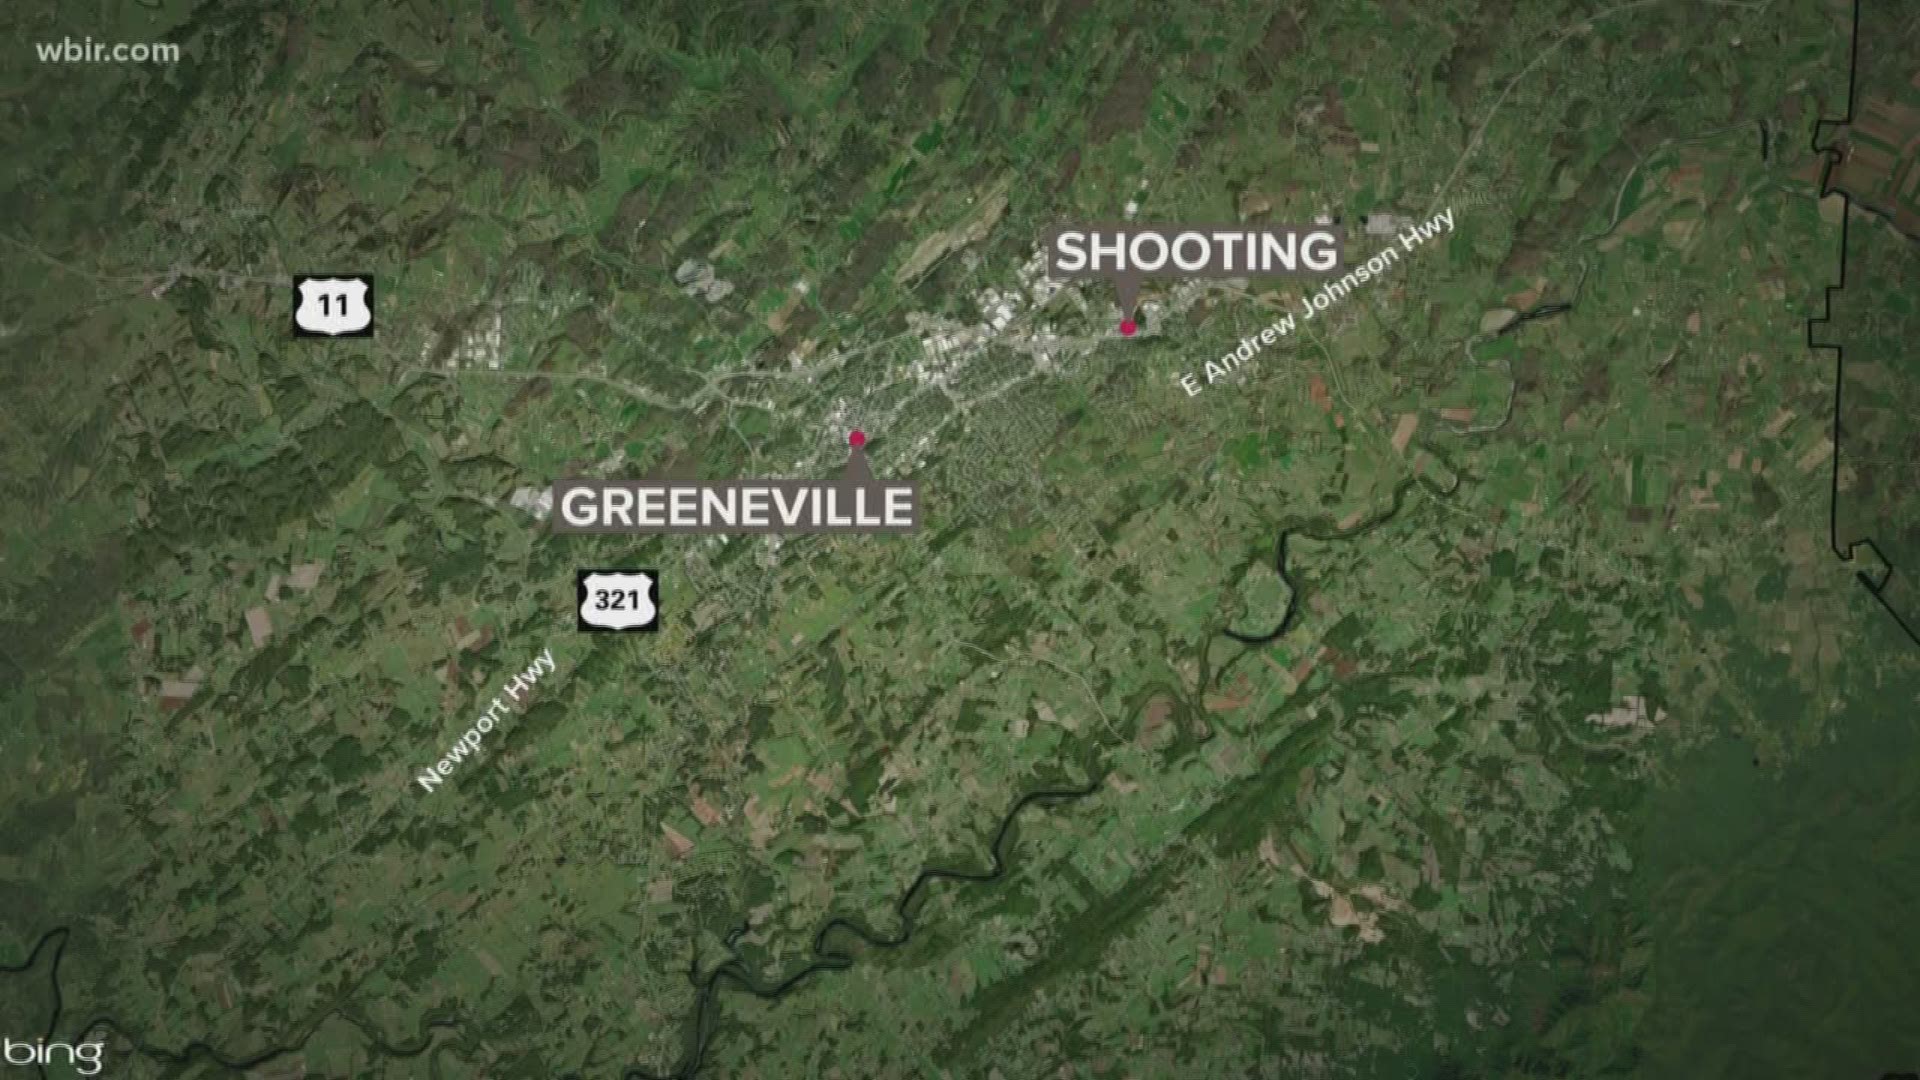 The TBI said that a Cocke County corrections officer is dead after a shooting with Greenville police.